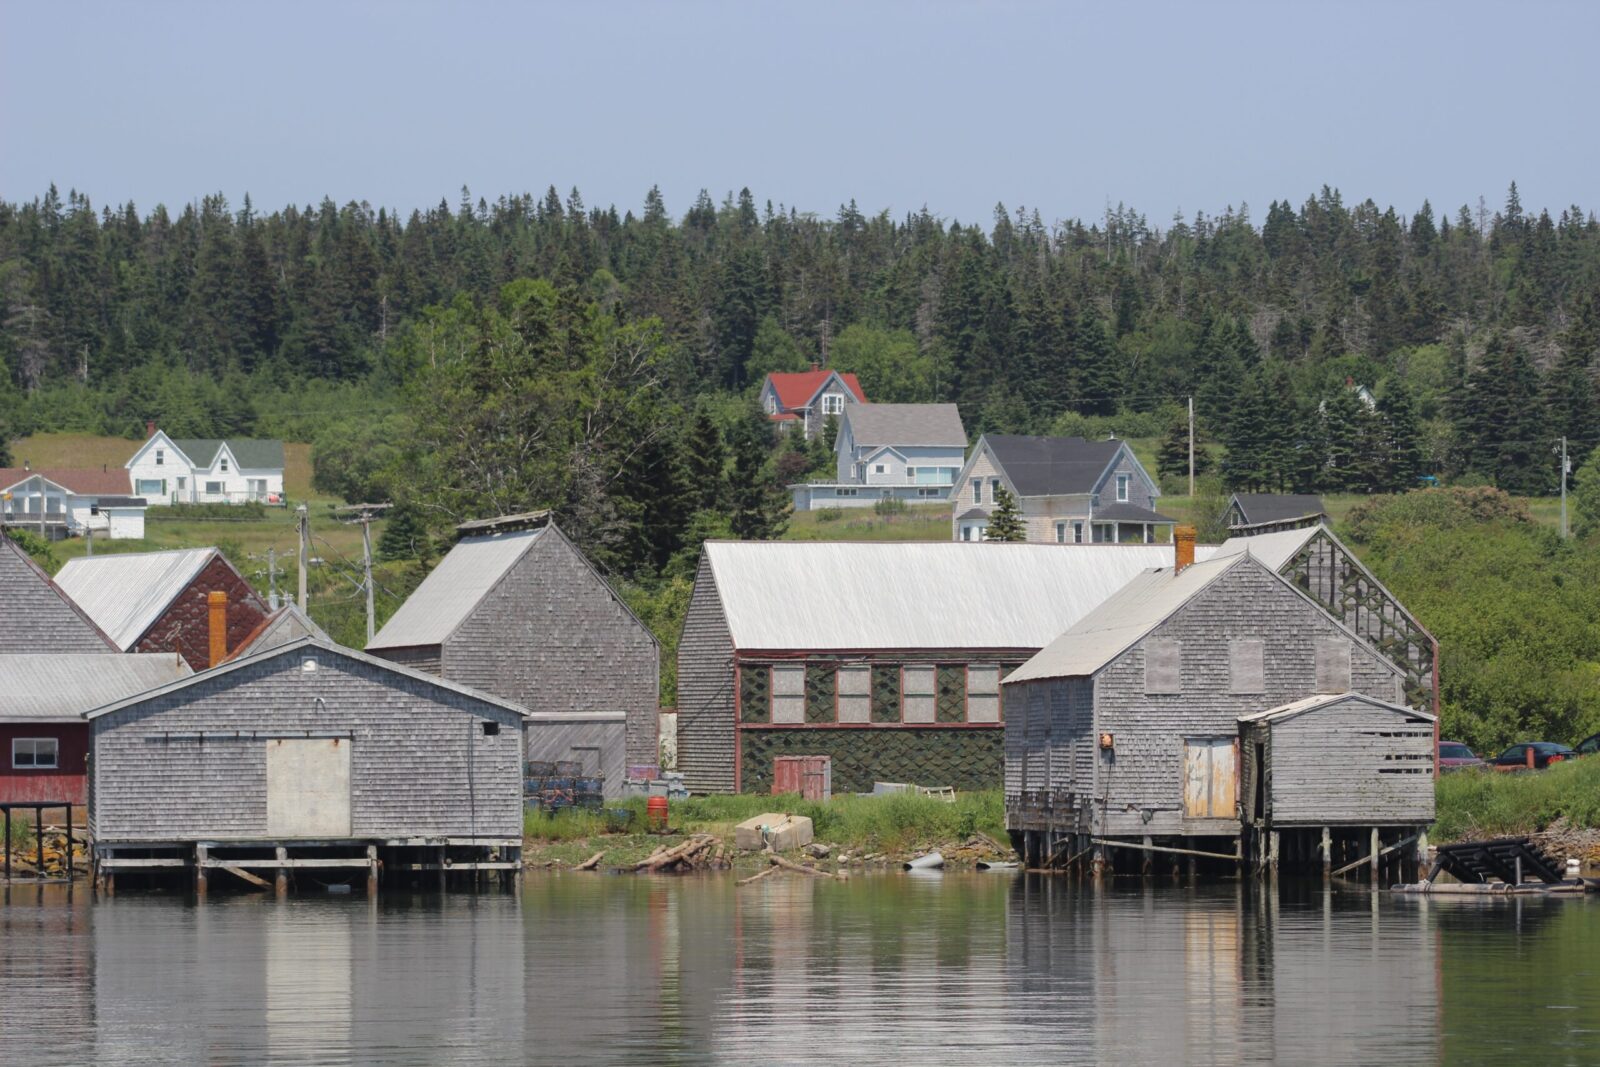 A group of houses on the shore of a body of water.